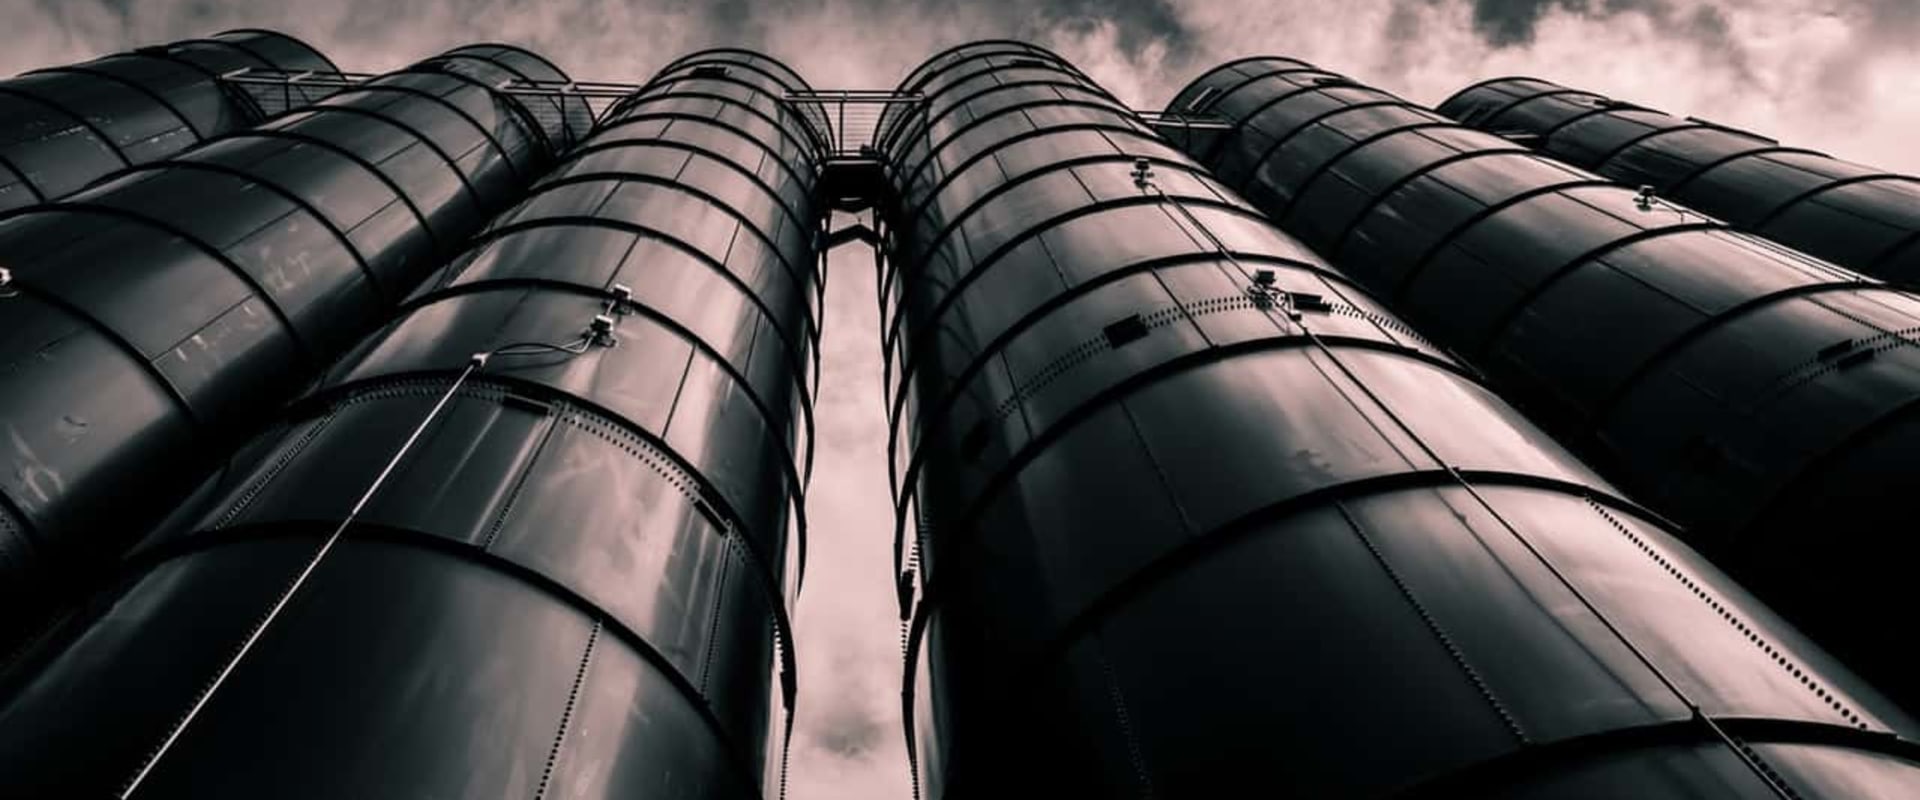 How do i create a silo structure in wordpress?